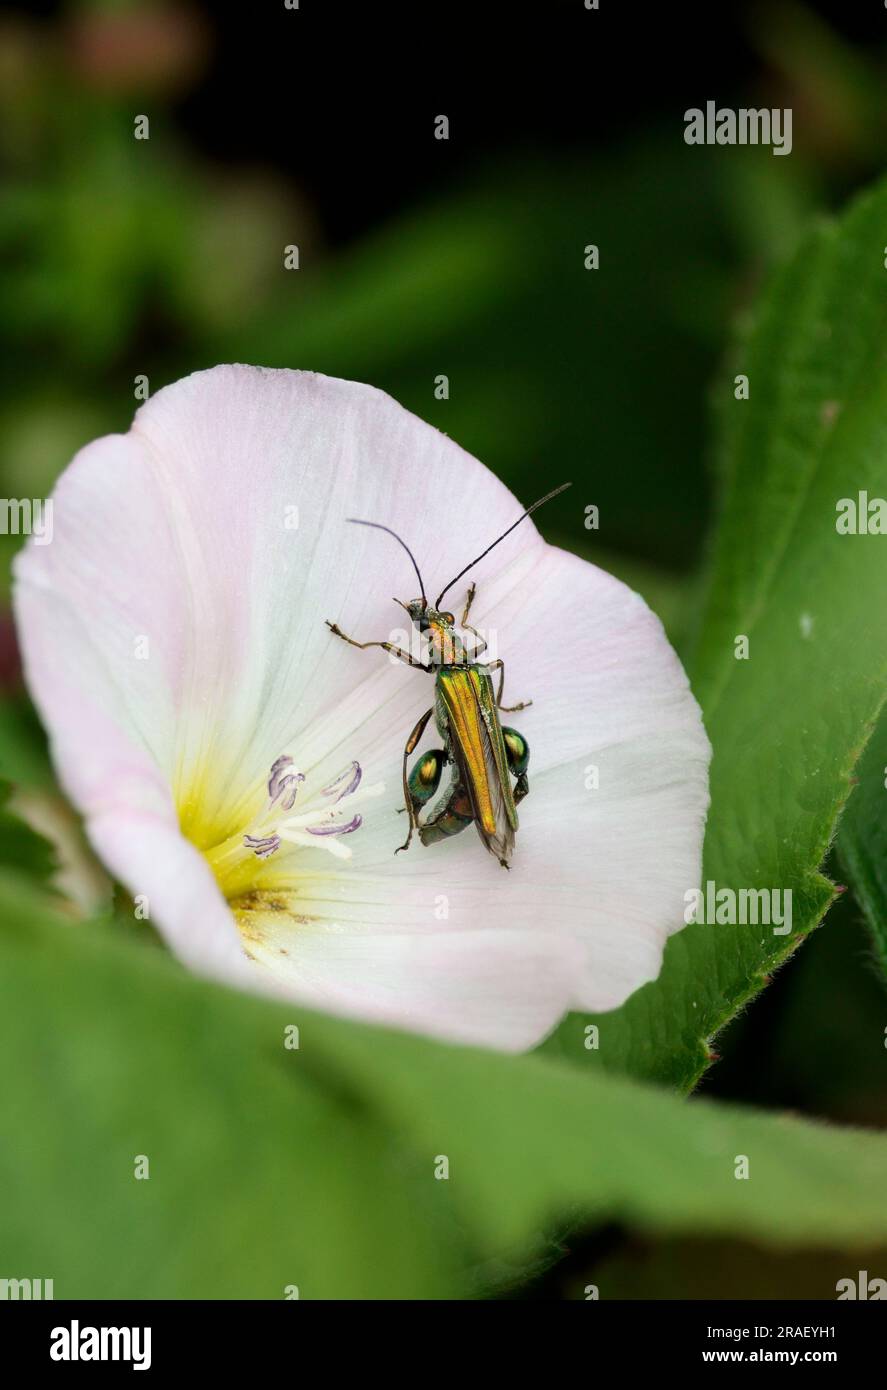 Oedemera nobilis small shiny slender green beetle male has swollen hind femora elytra taper and splay towards tip of abdomen don't cover all of wings Stock Photo